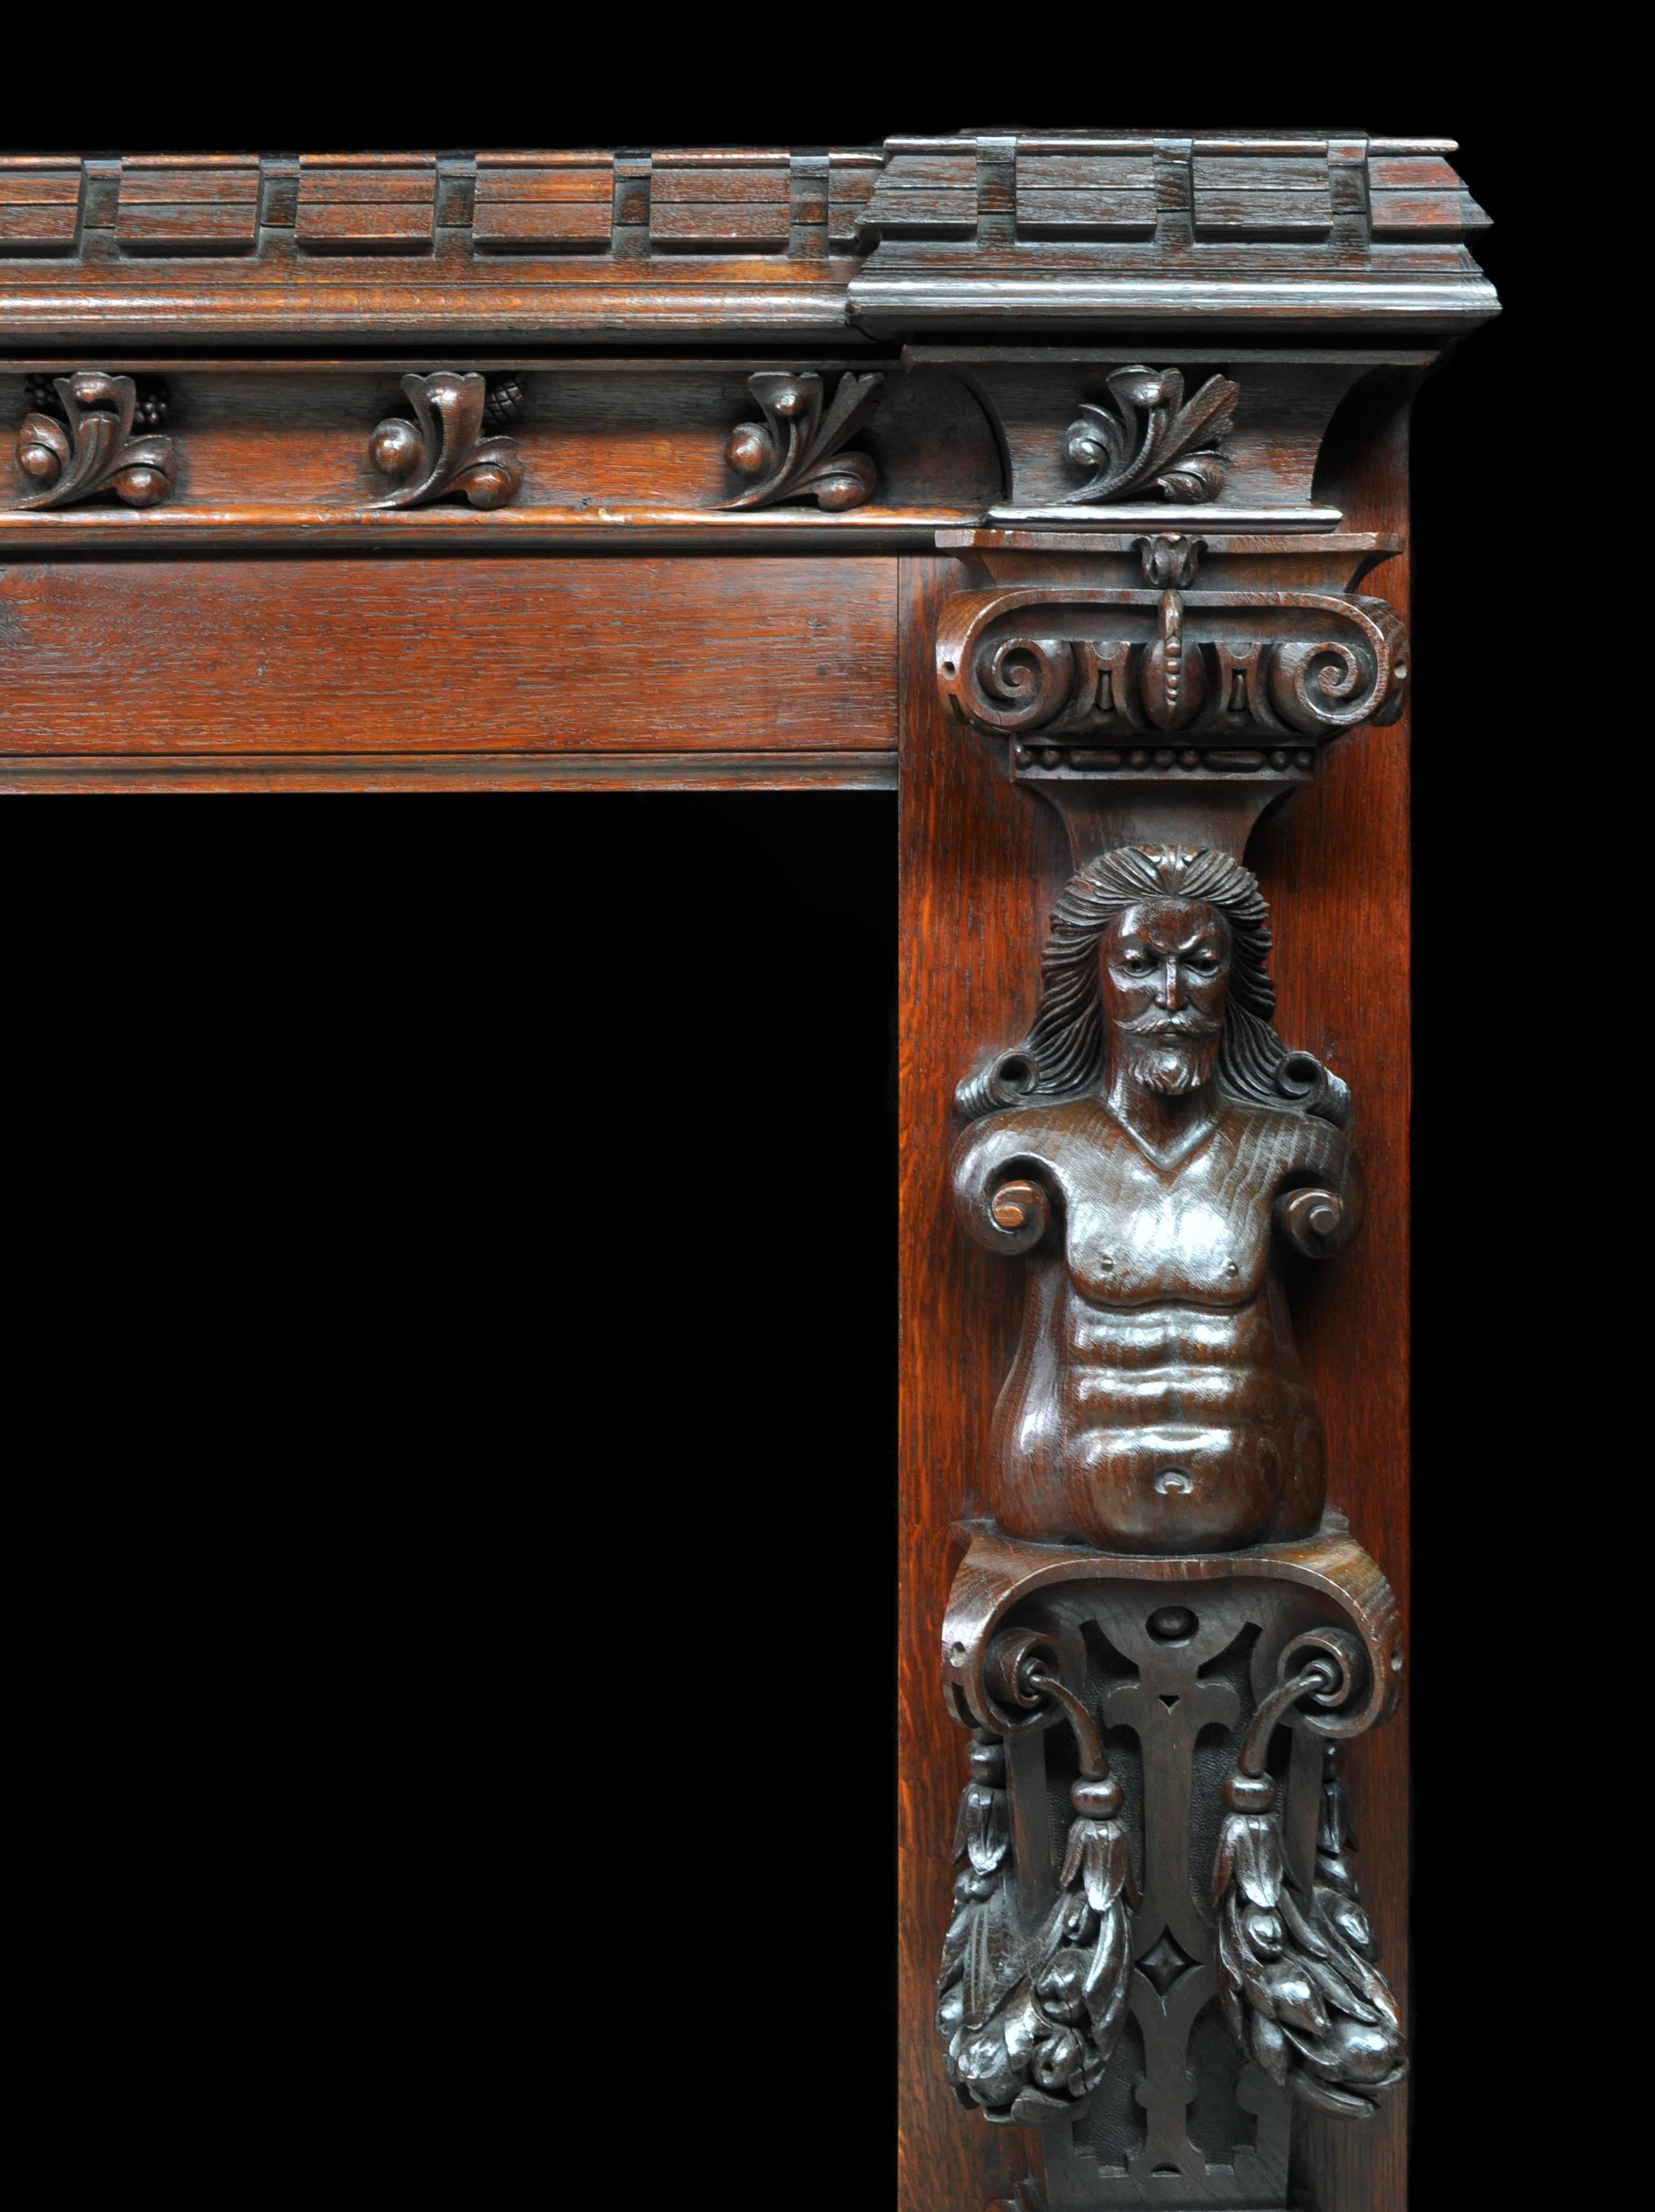 English Castellated Jacobean Revival Style Antique Carved Oak Fireplace Mantel For Sale